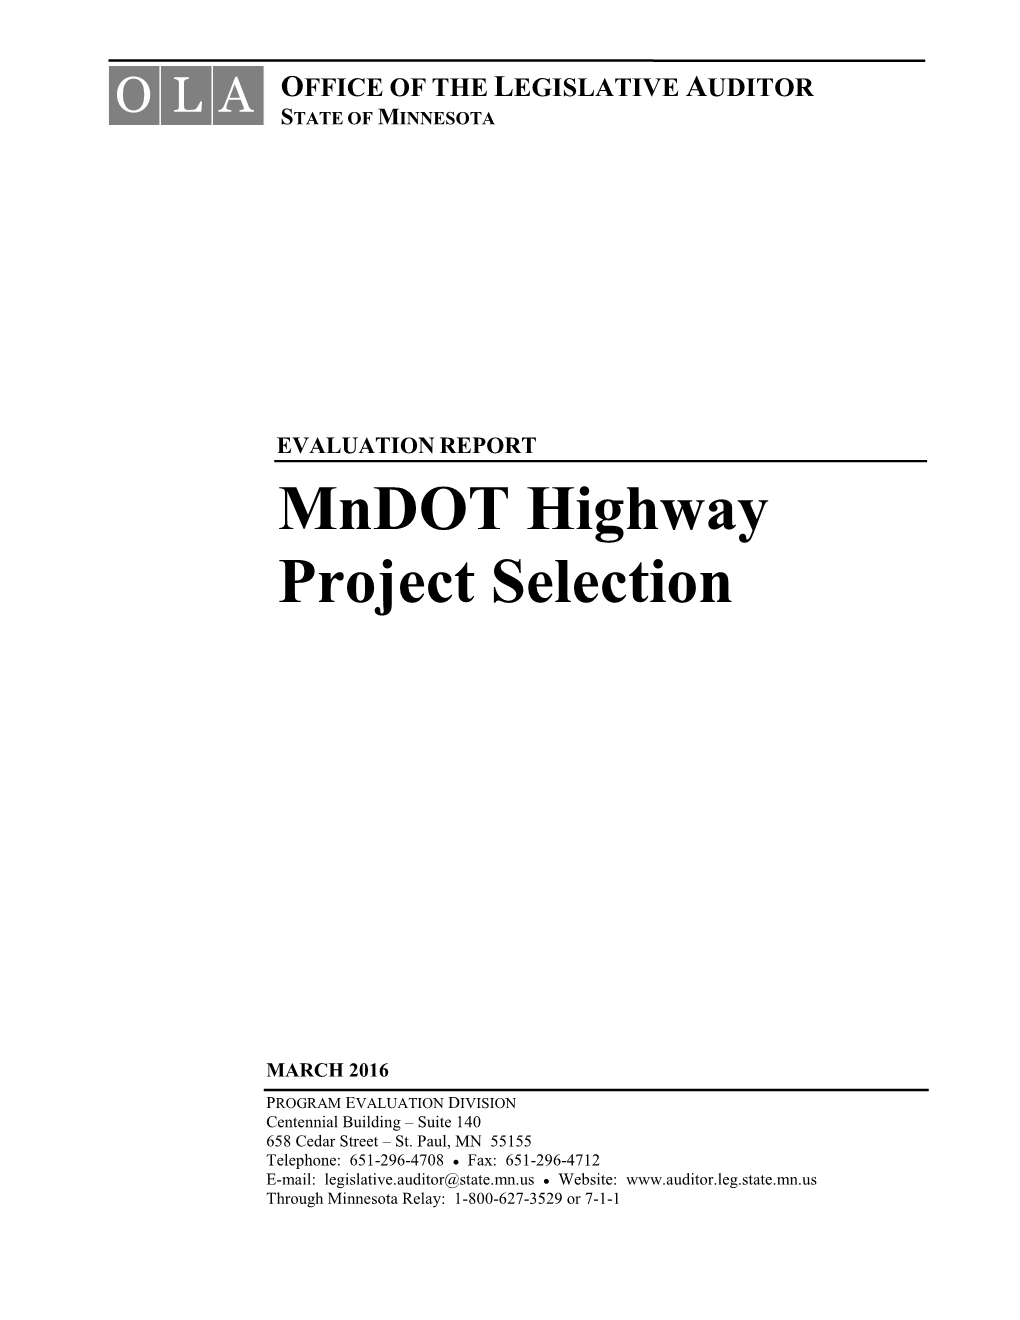 Mndot Highway Project Selection